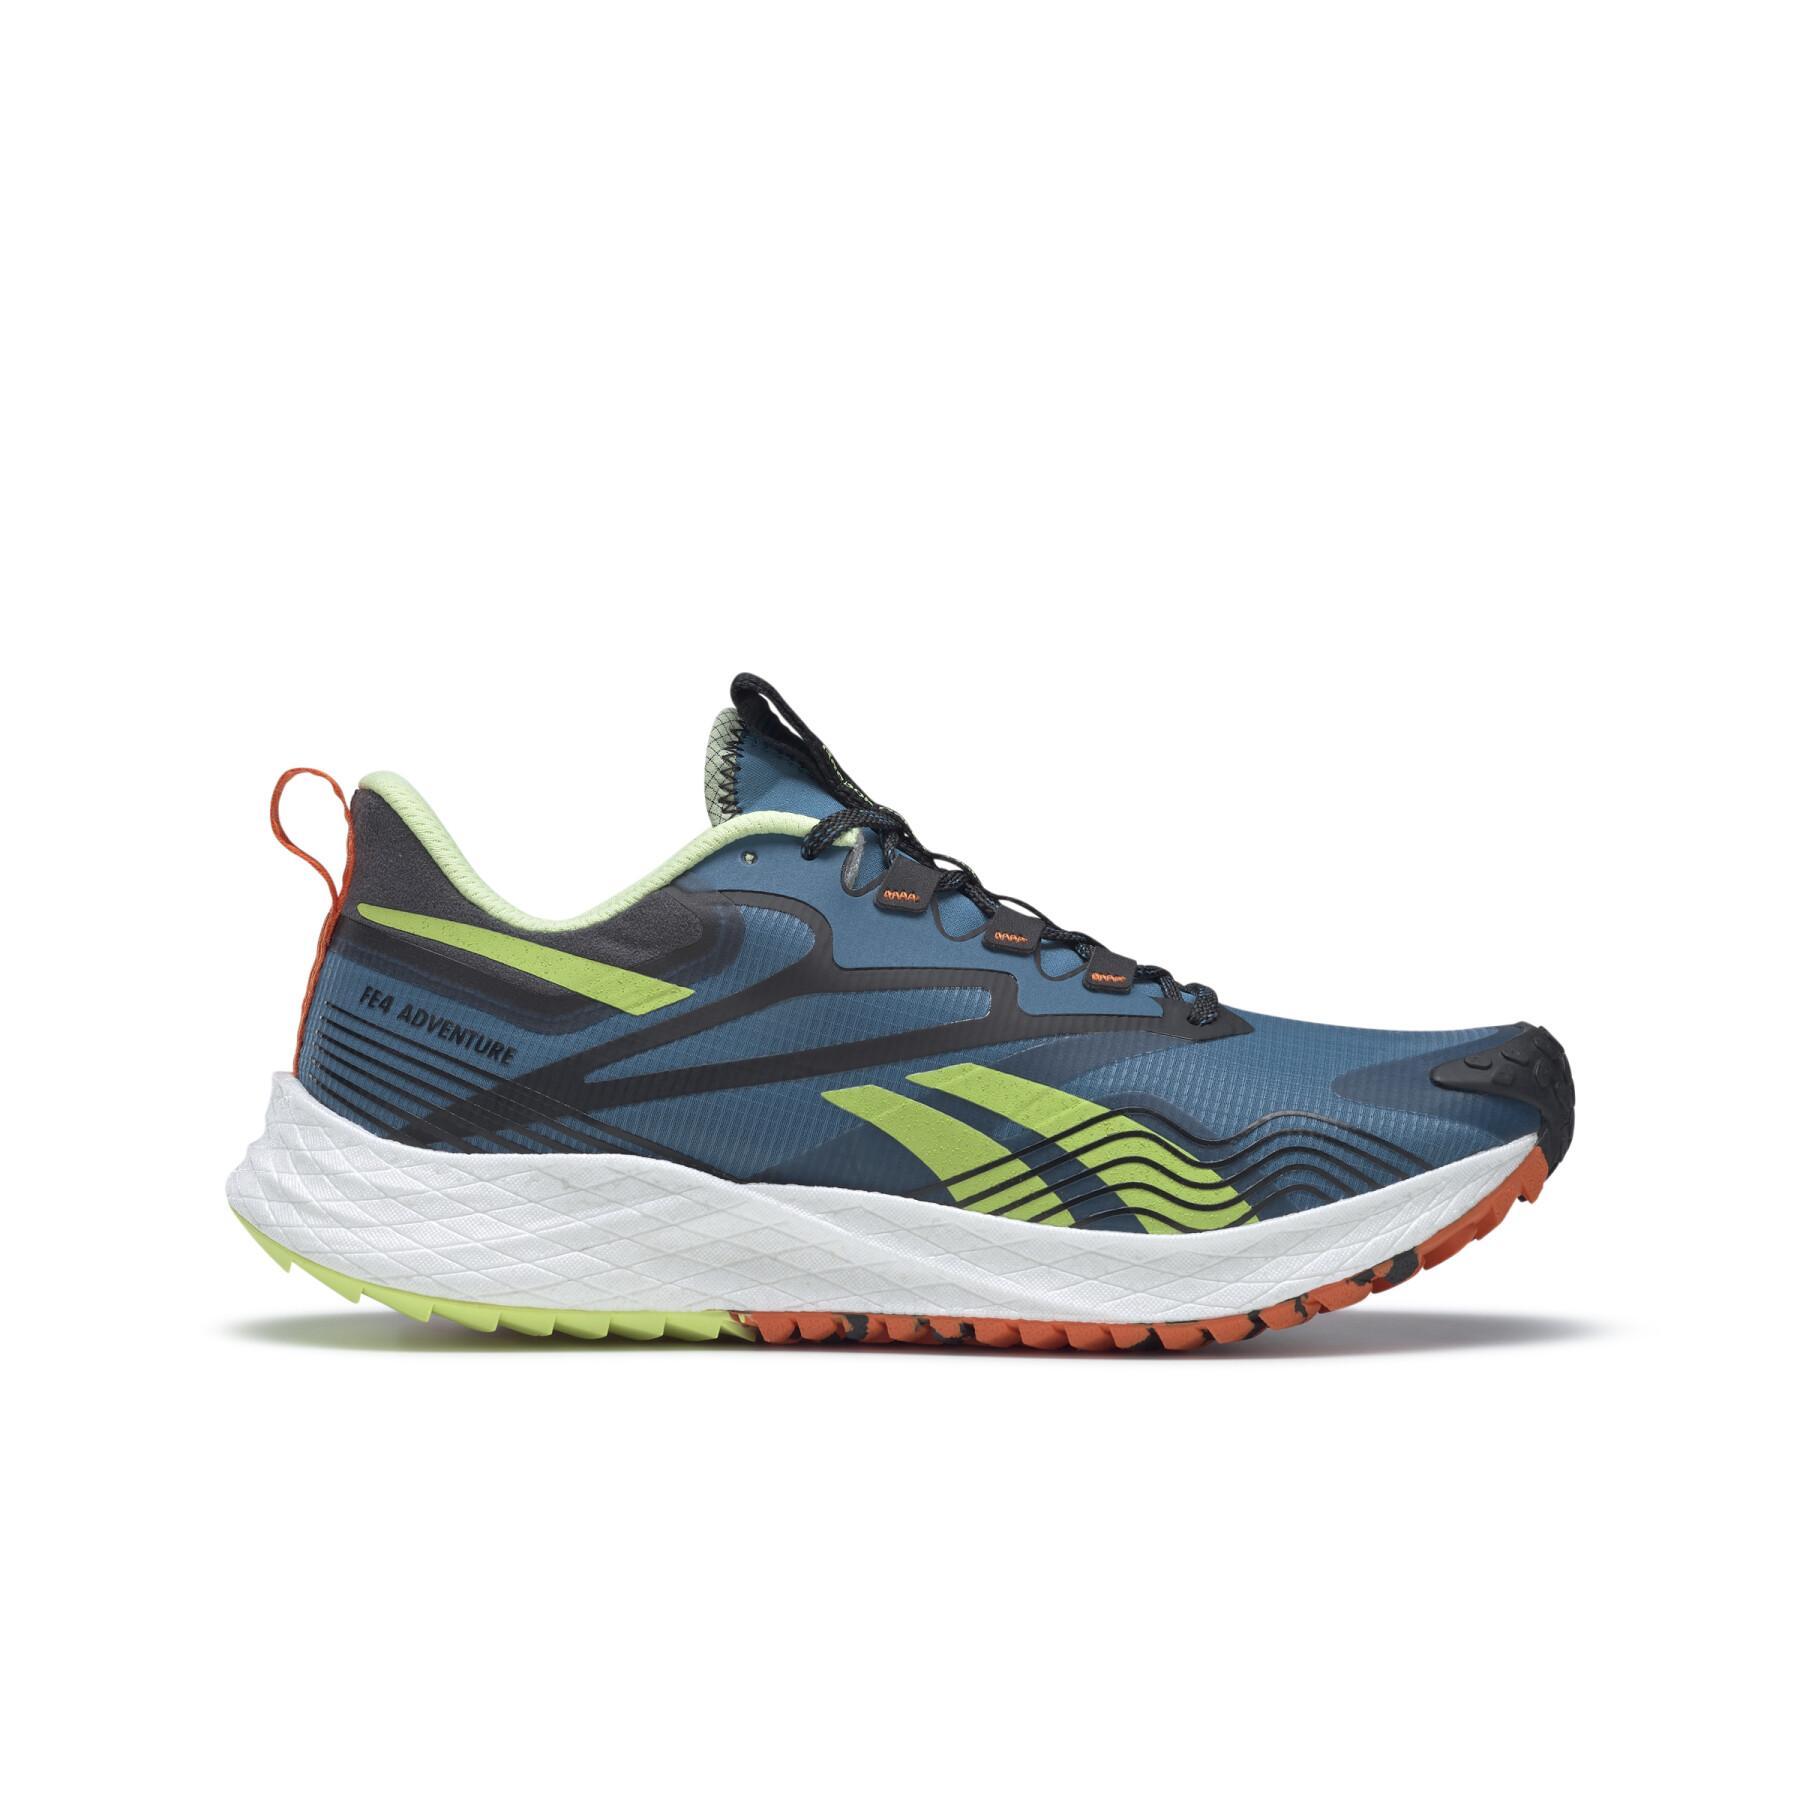 Shoes from running Reebok Floatride Energy 4 Adventure